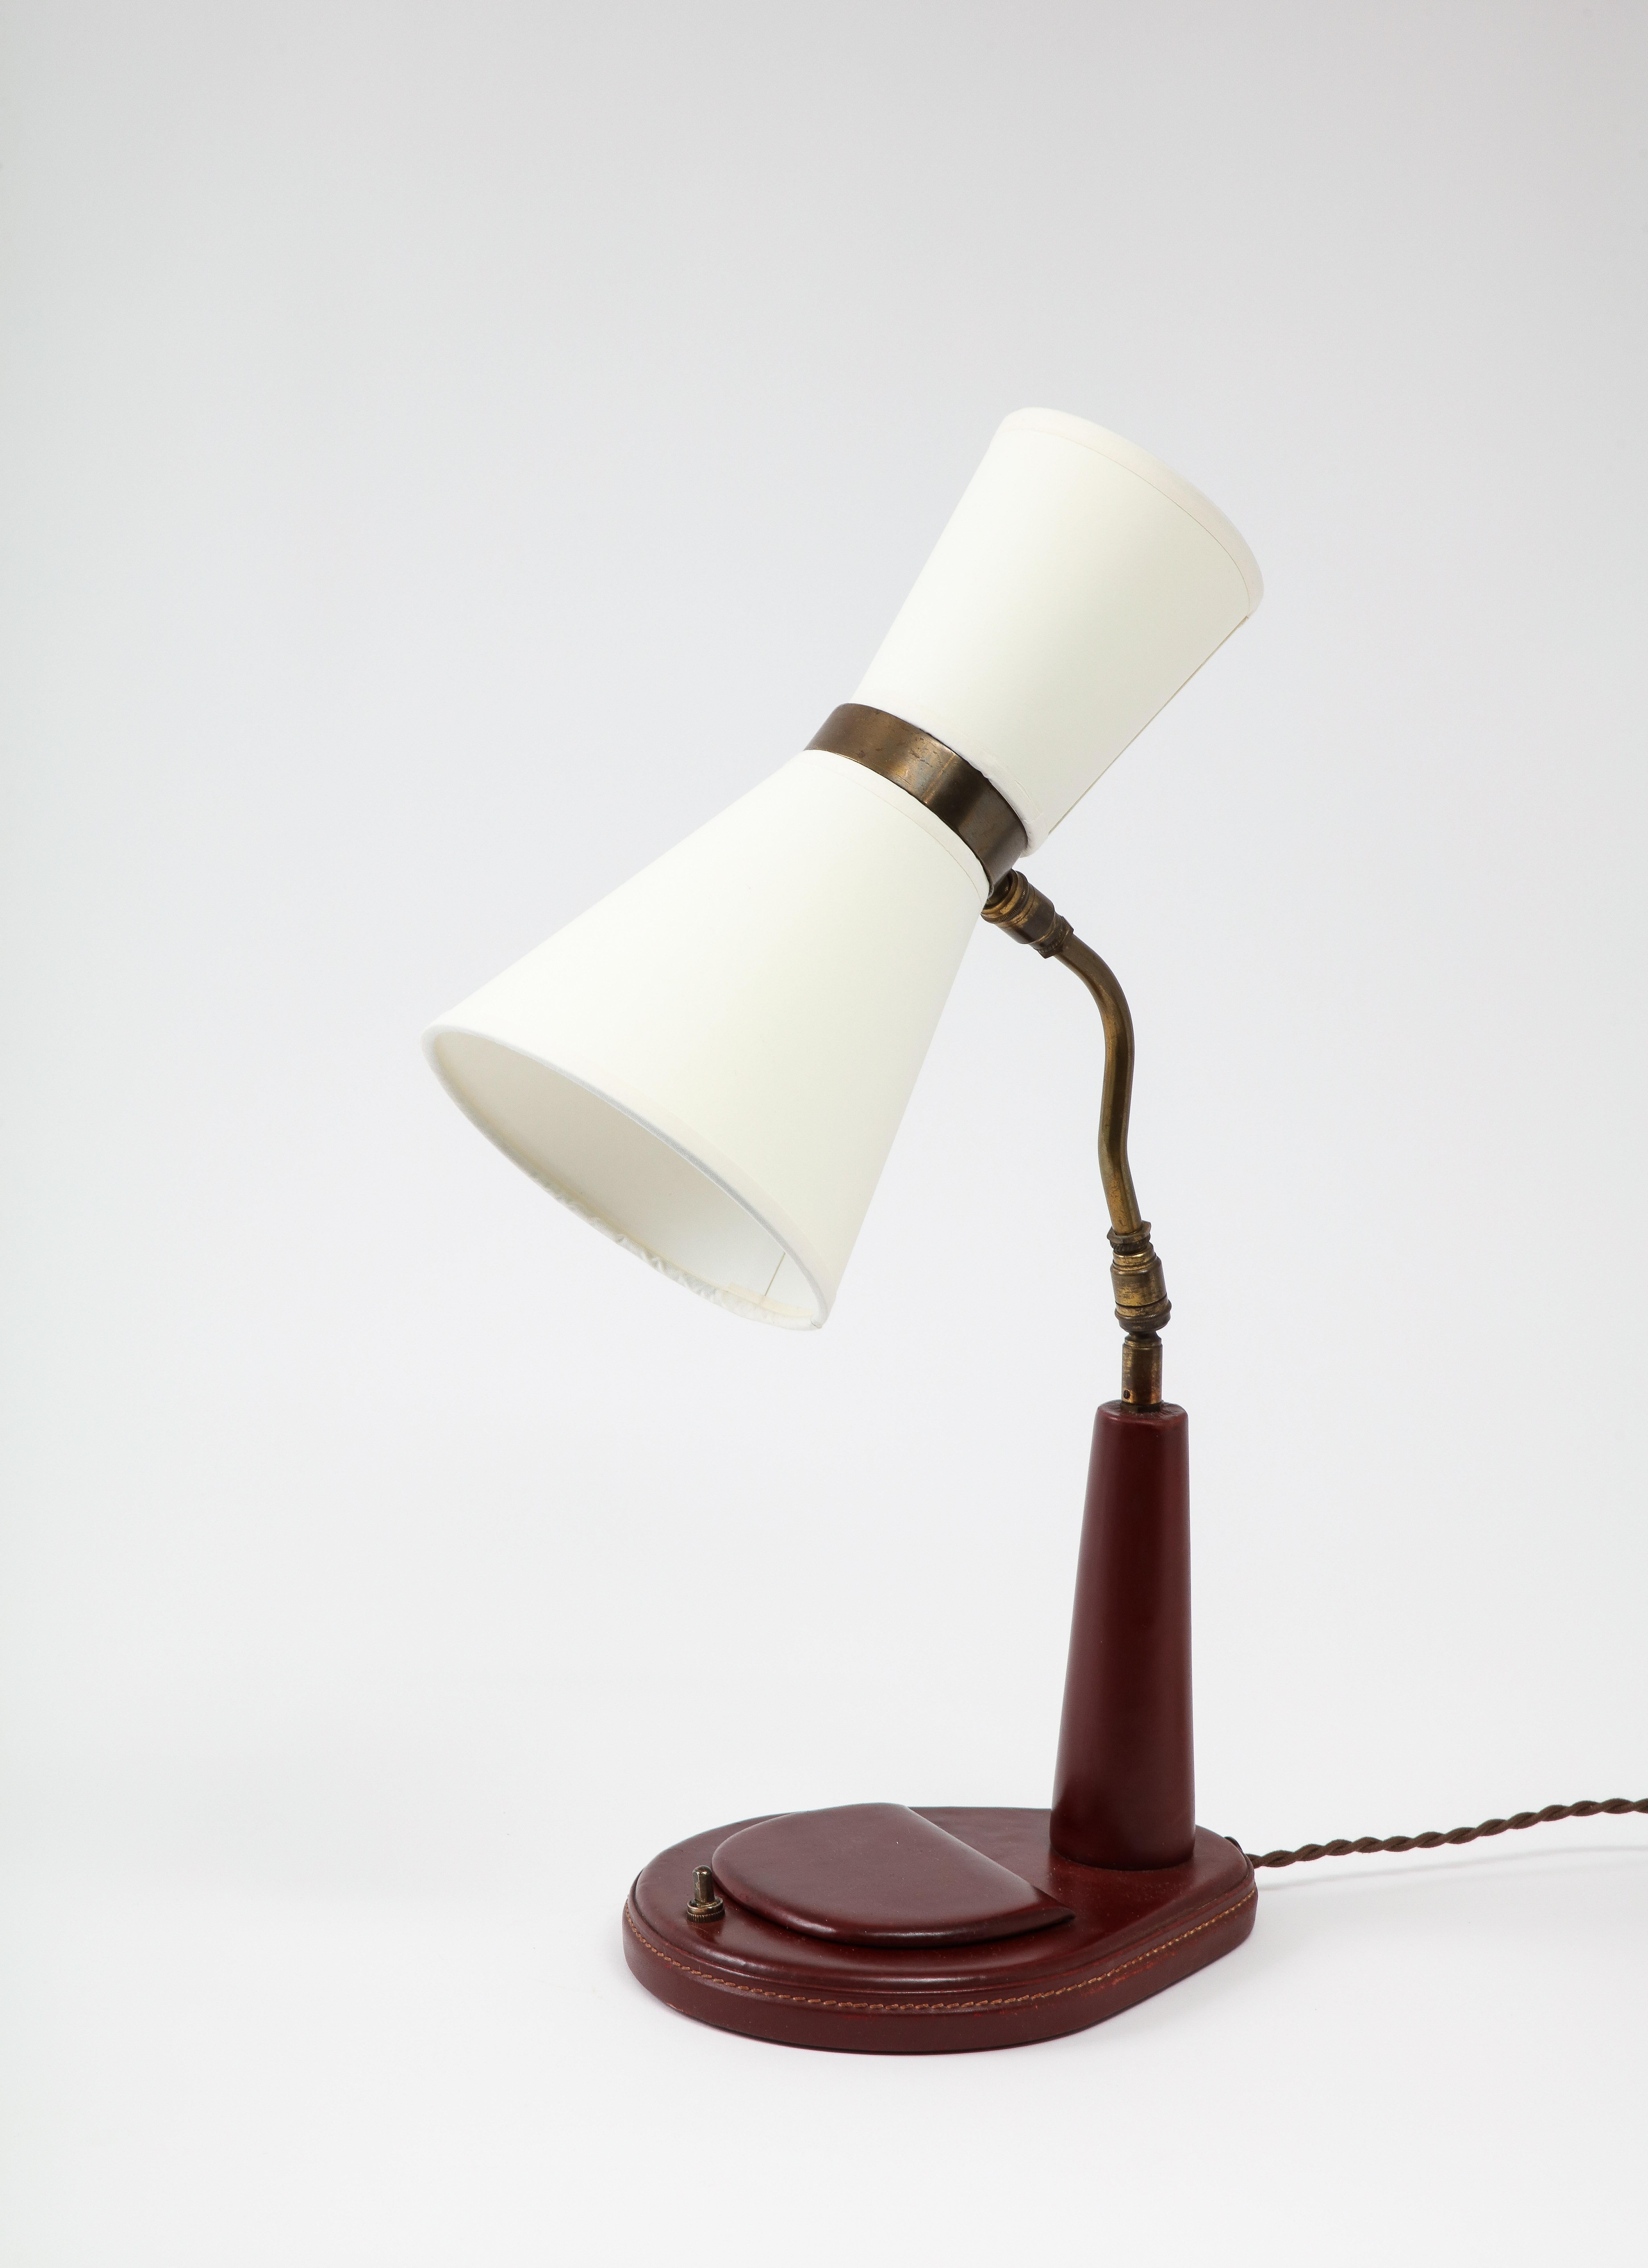 Elegant Lancel desk lamp in burgundy leather; it has a small lidded compartment in the base. The lamp is rewired with a silk cord and period-style plug and comes with custom shades. Candelabra sockets for 60W bulbs